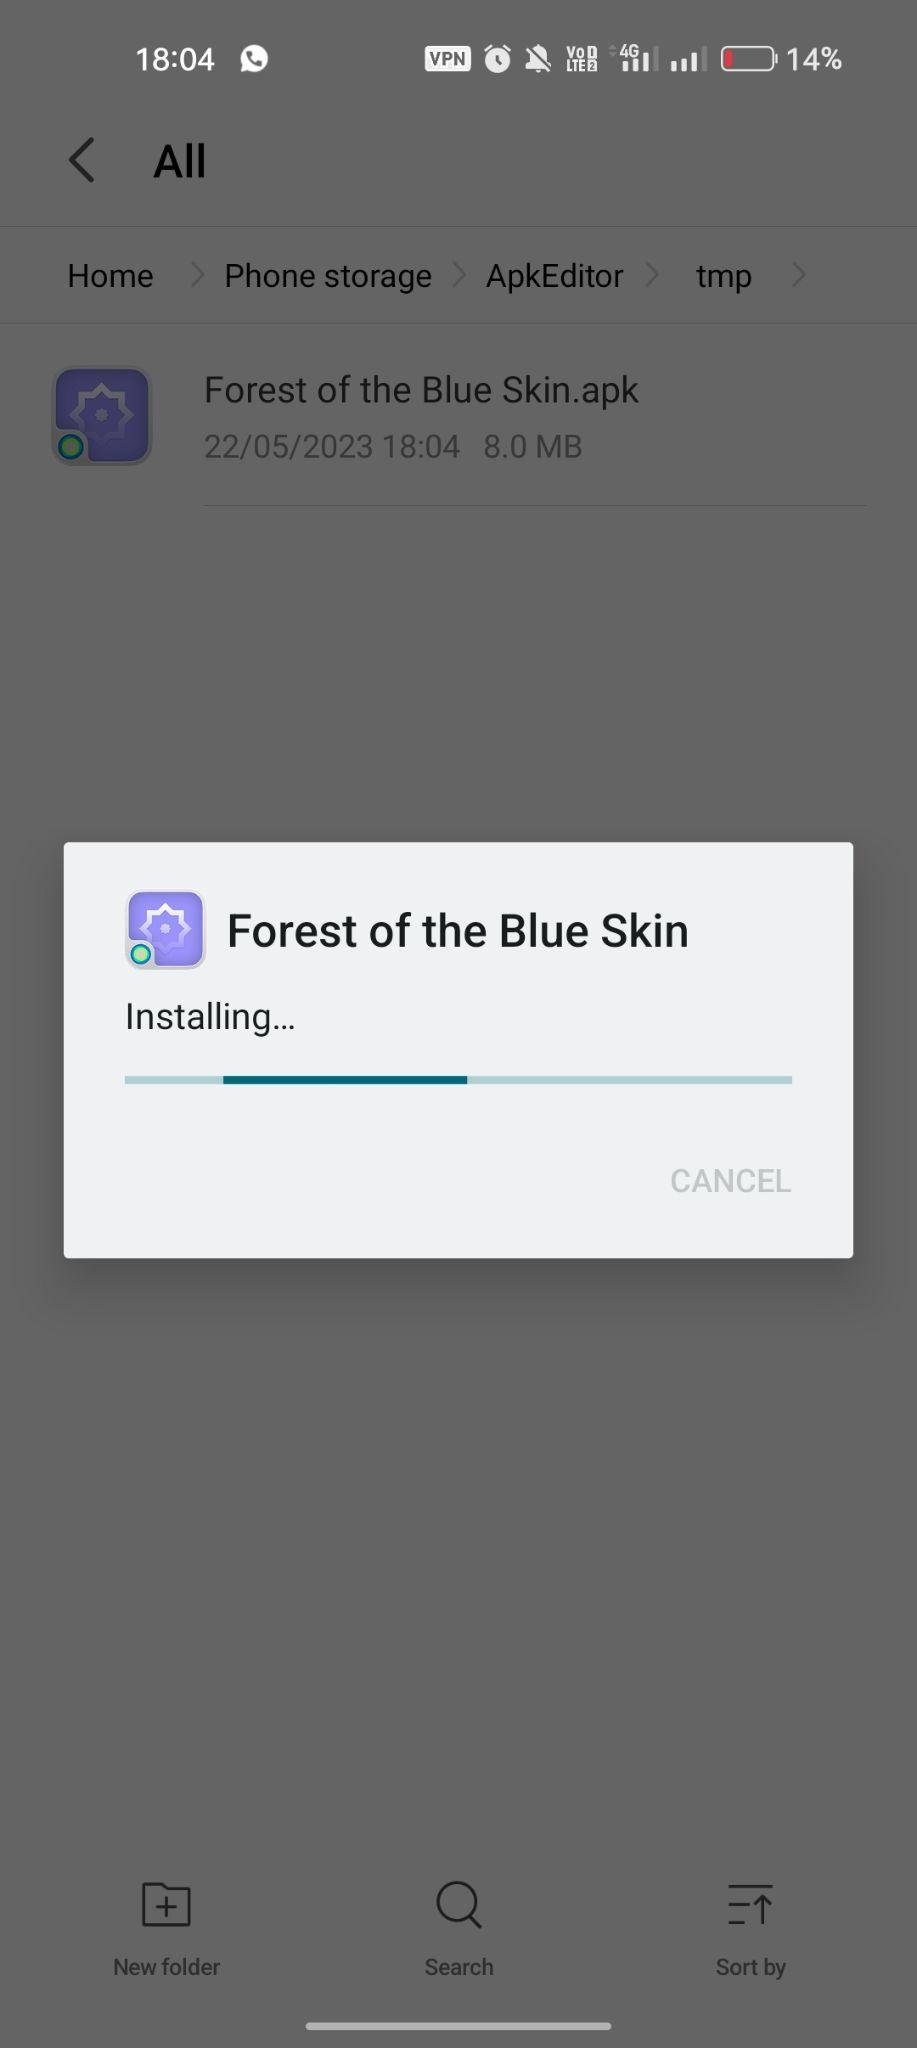 Forest of the Blue Skin apk installing